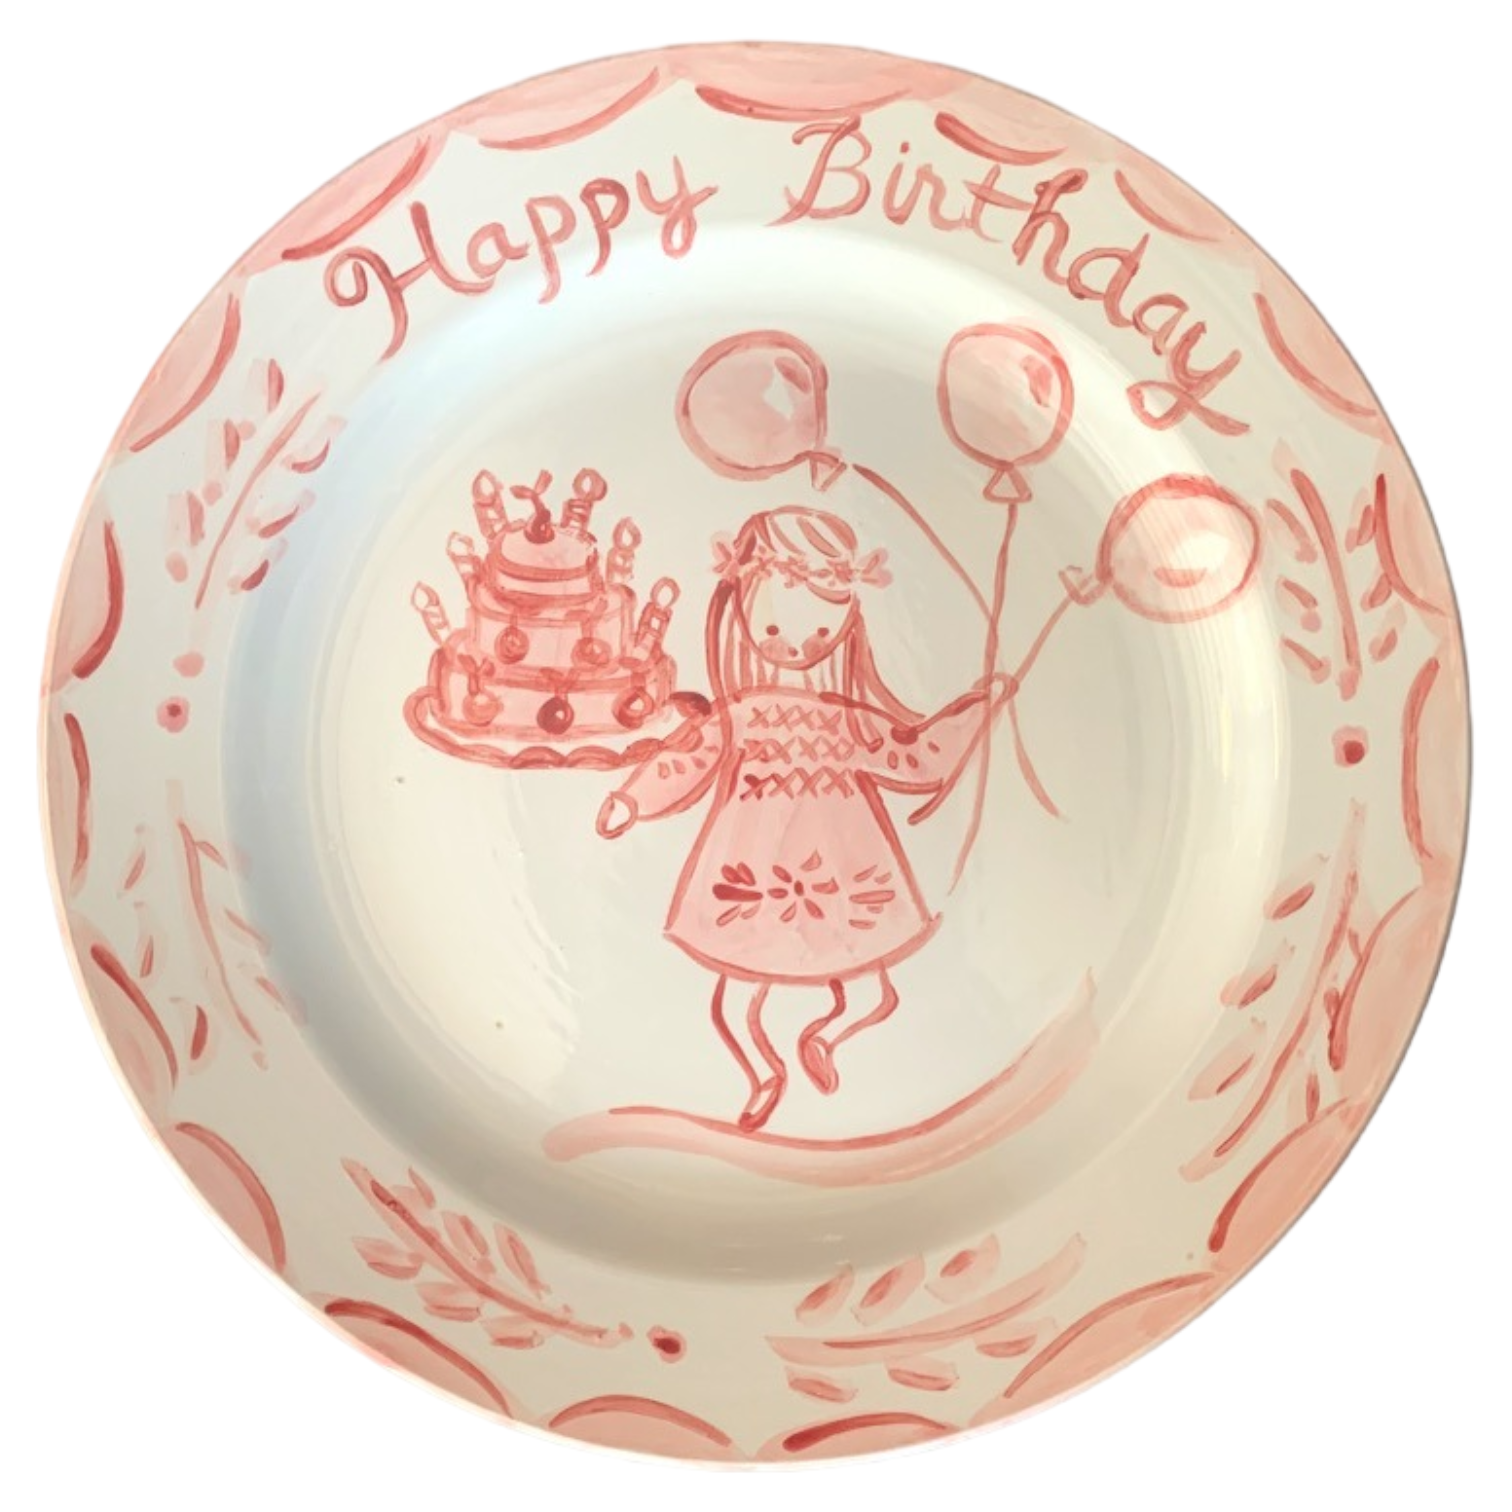 Birthday Plate - Pink/White (generic) - Premium  from Tricia Lowenfield Shop 